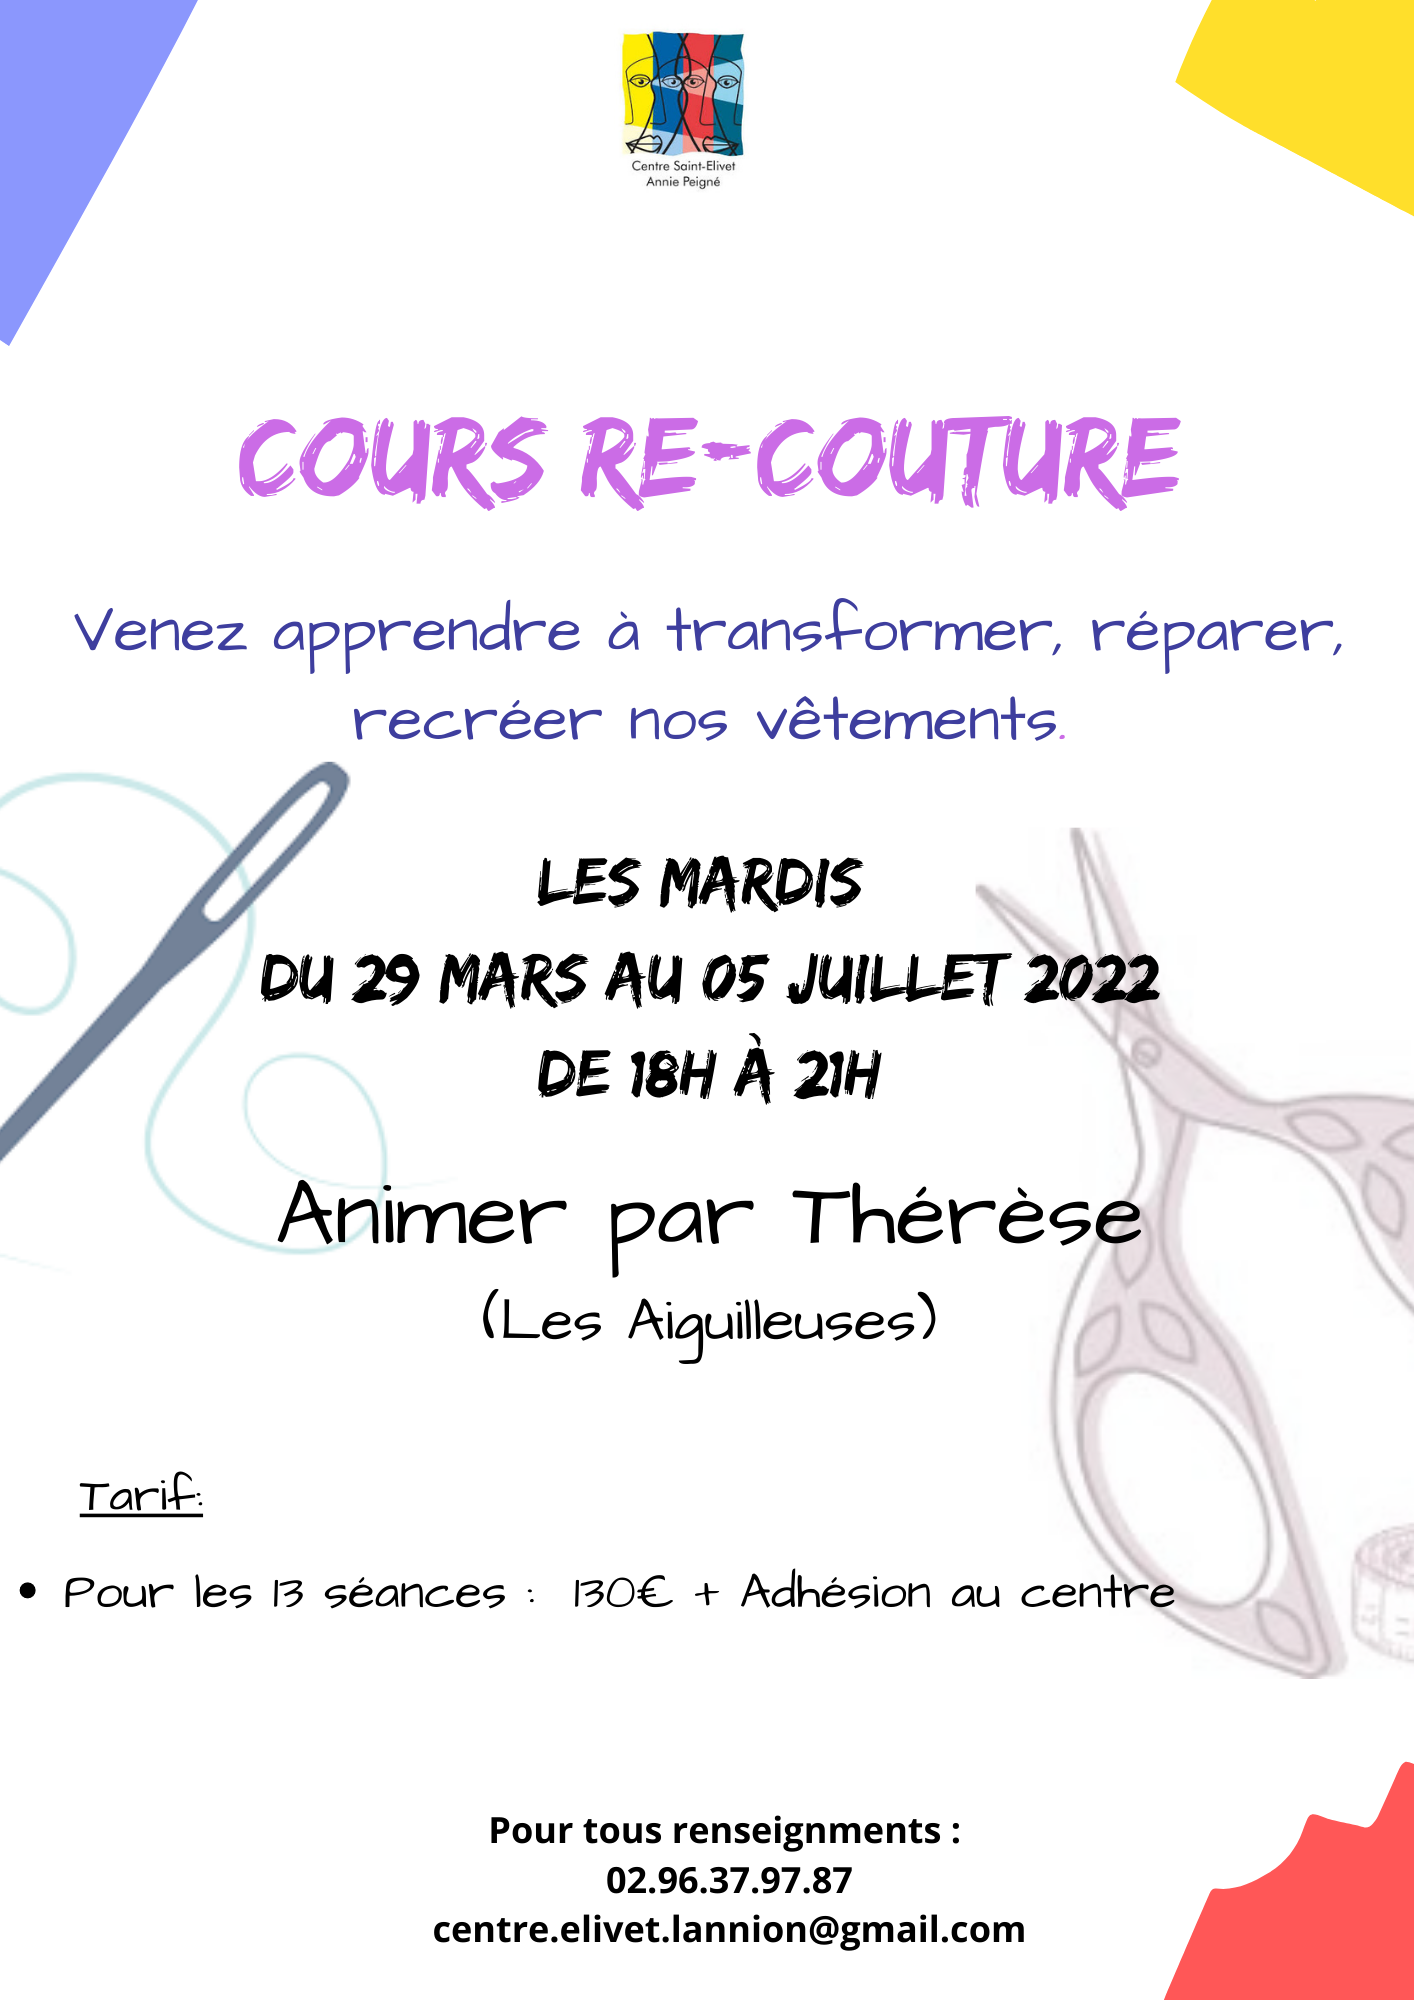 COURS RE-COUTURE